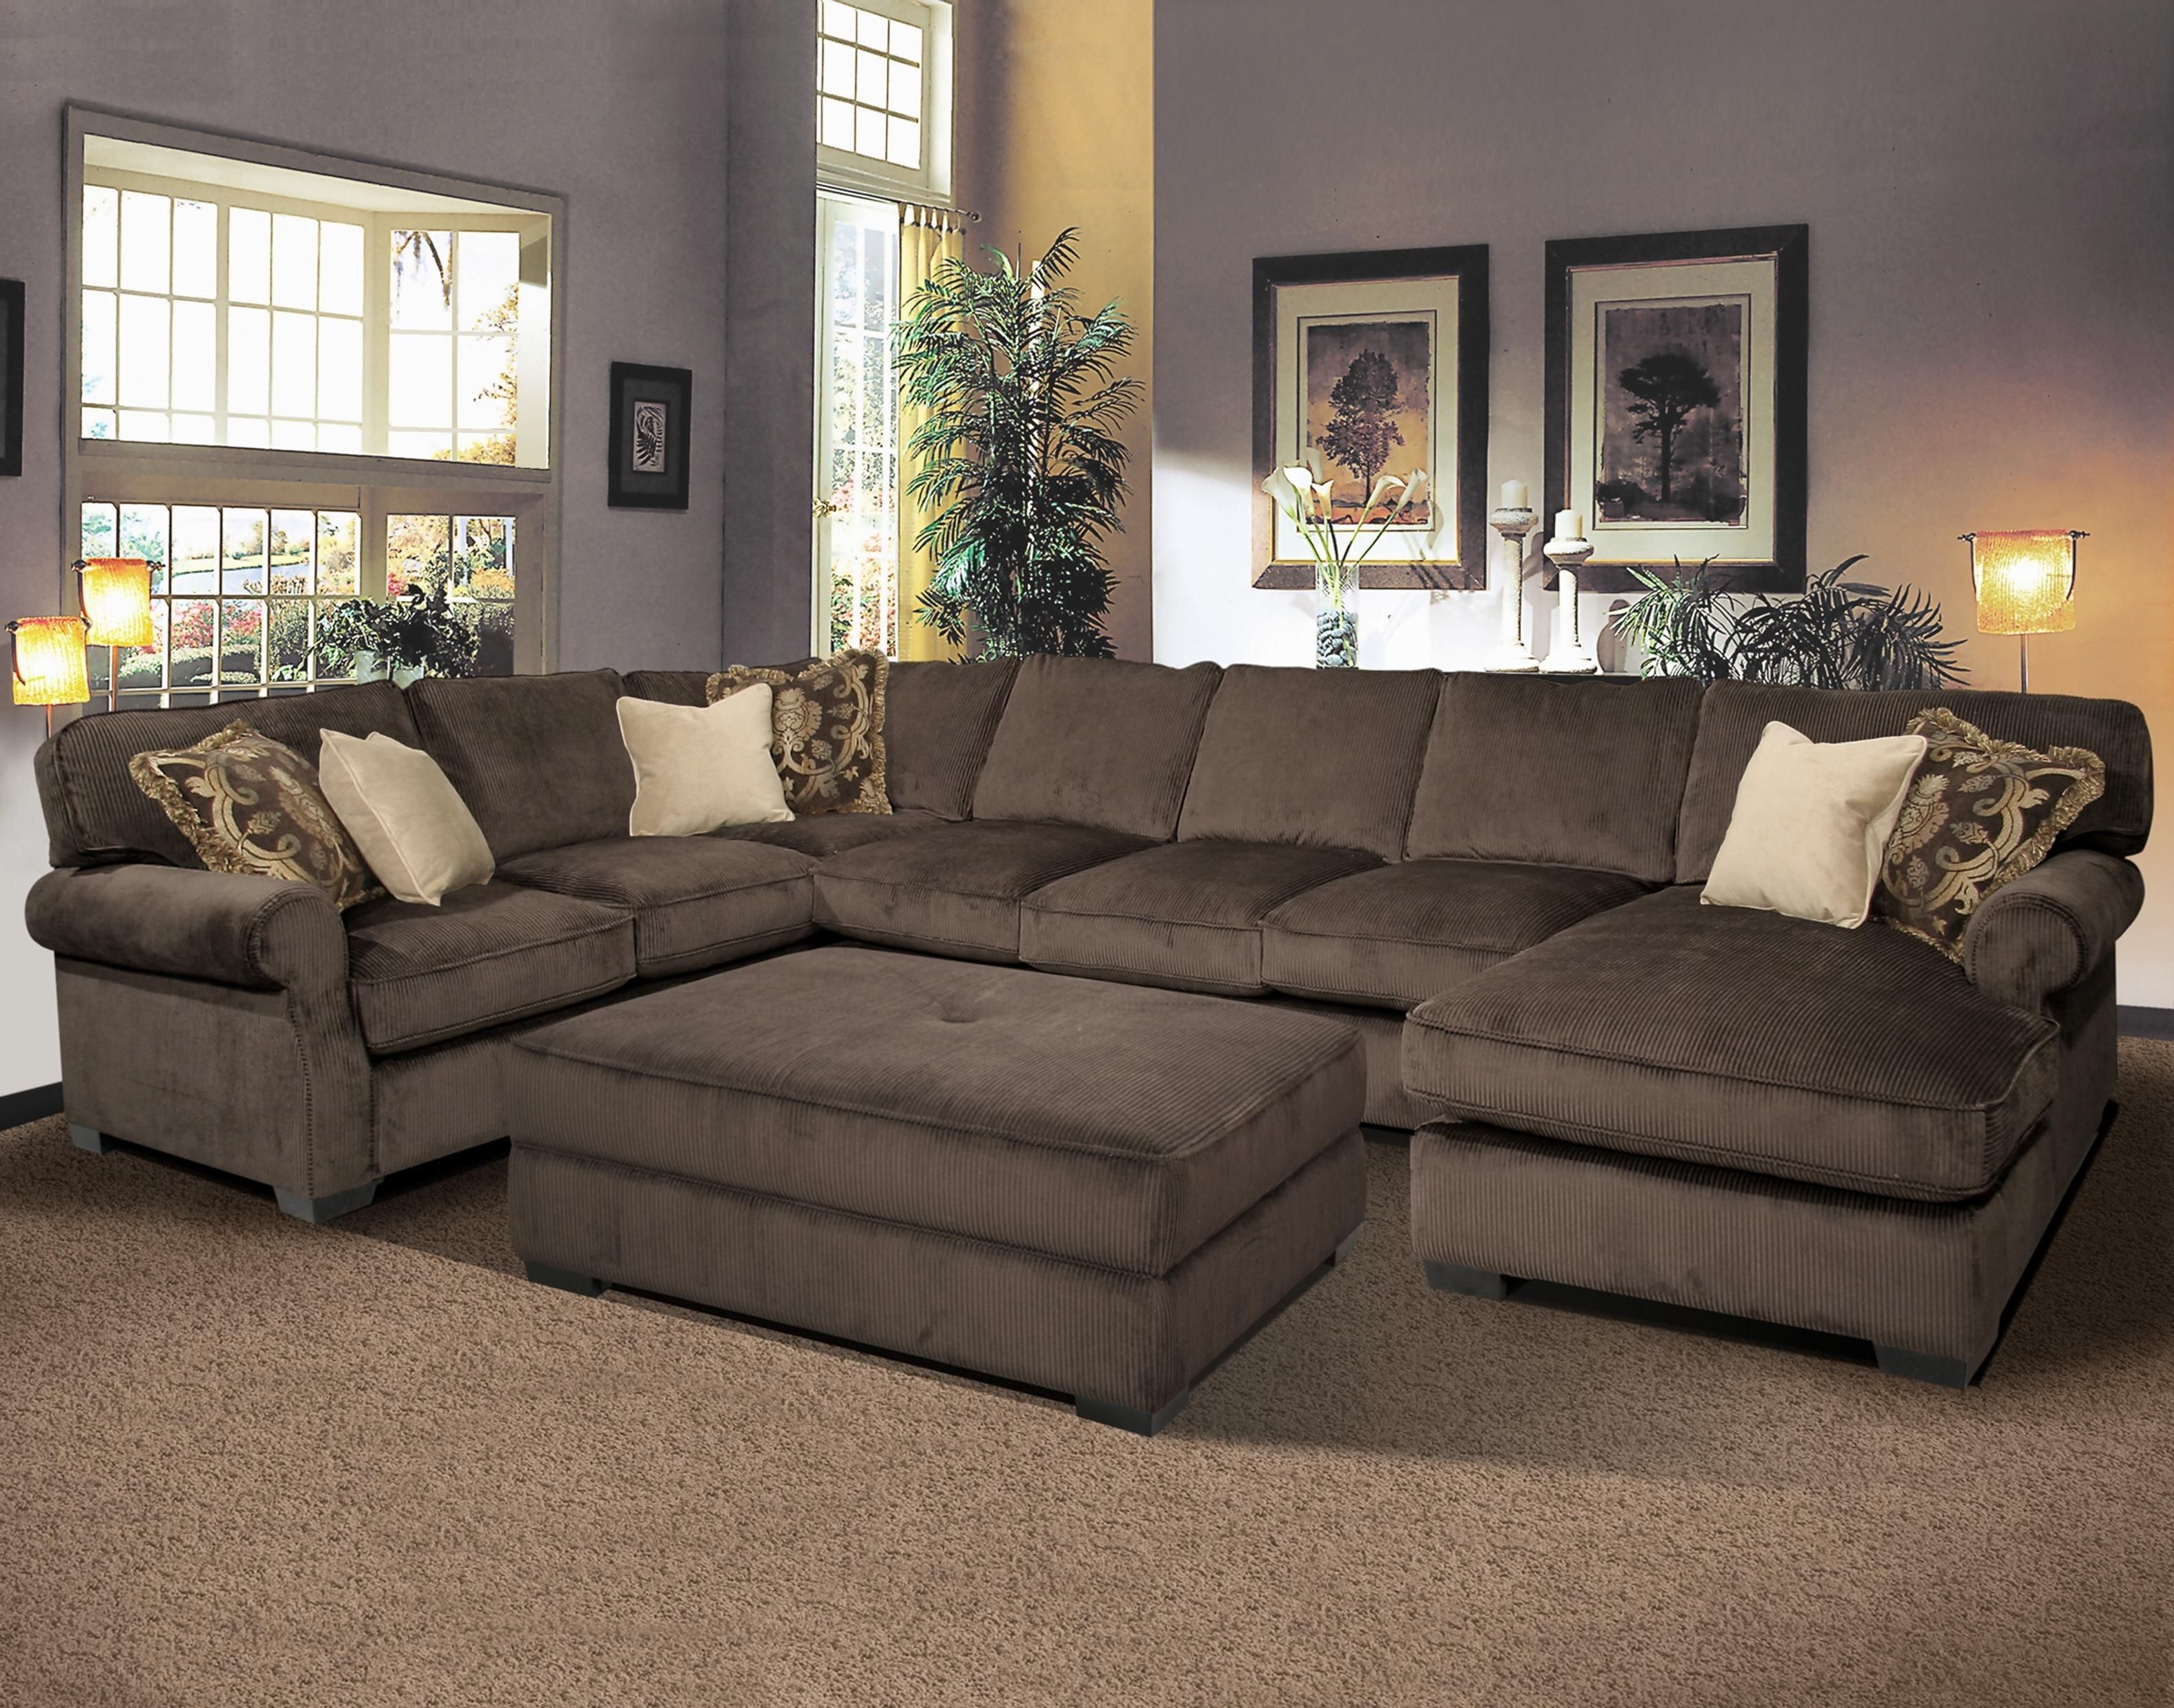 Newest Microfiber Sectional Sofas With Grand Island Oversized Cocktail Ottoman For Sectional Sofa (View 11 of 15)